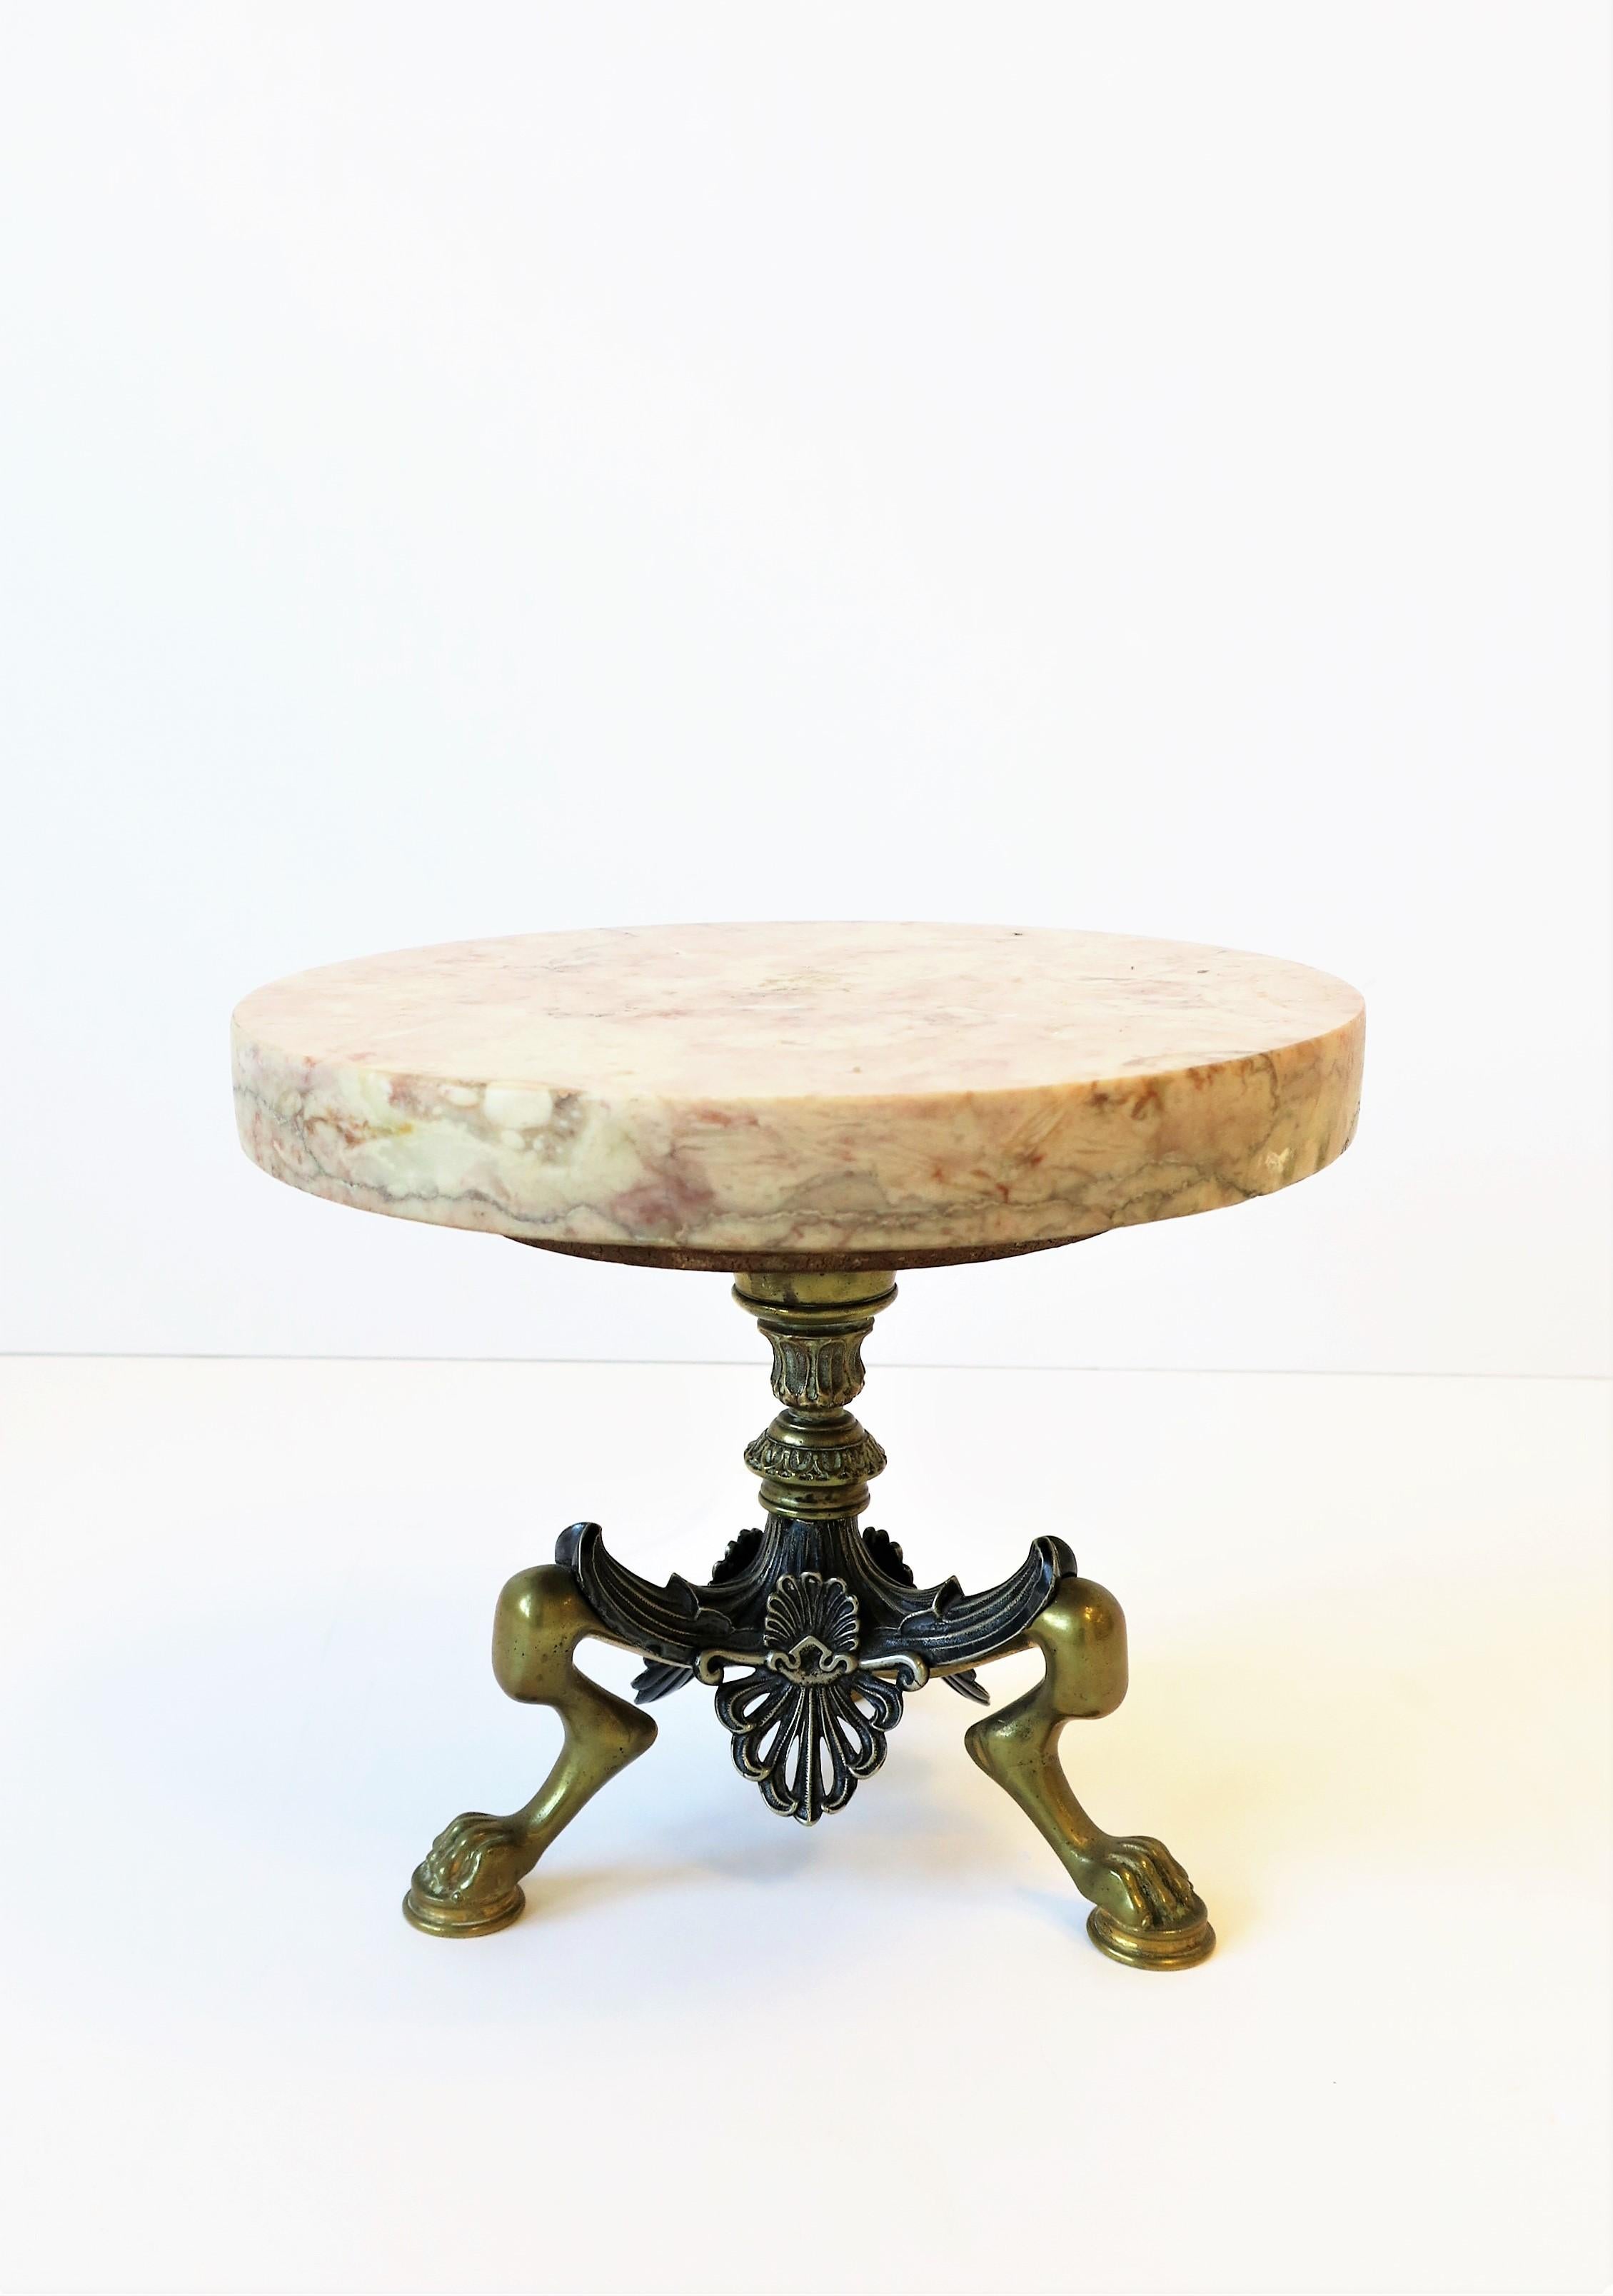 Marble and Brass Round Pedestal with Lion Paw Feet Plant Stand Regency Style For Sale 2